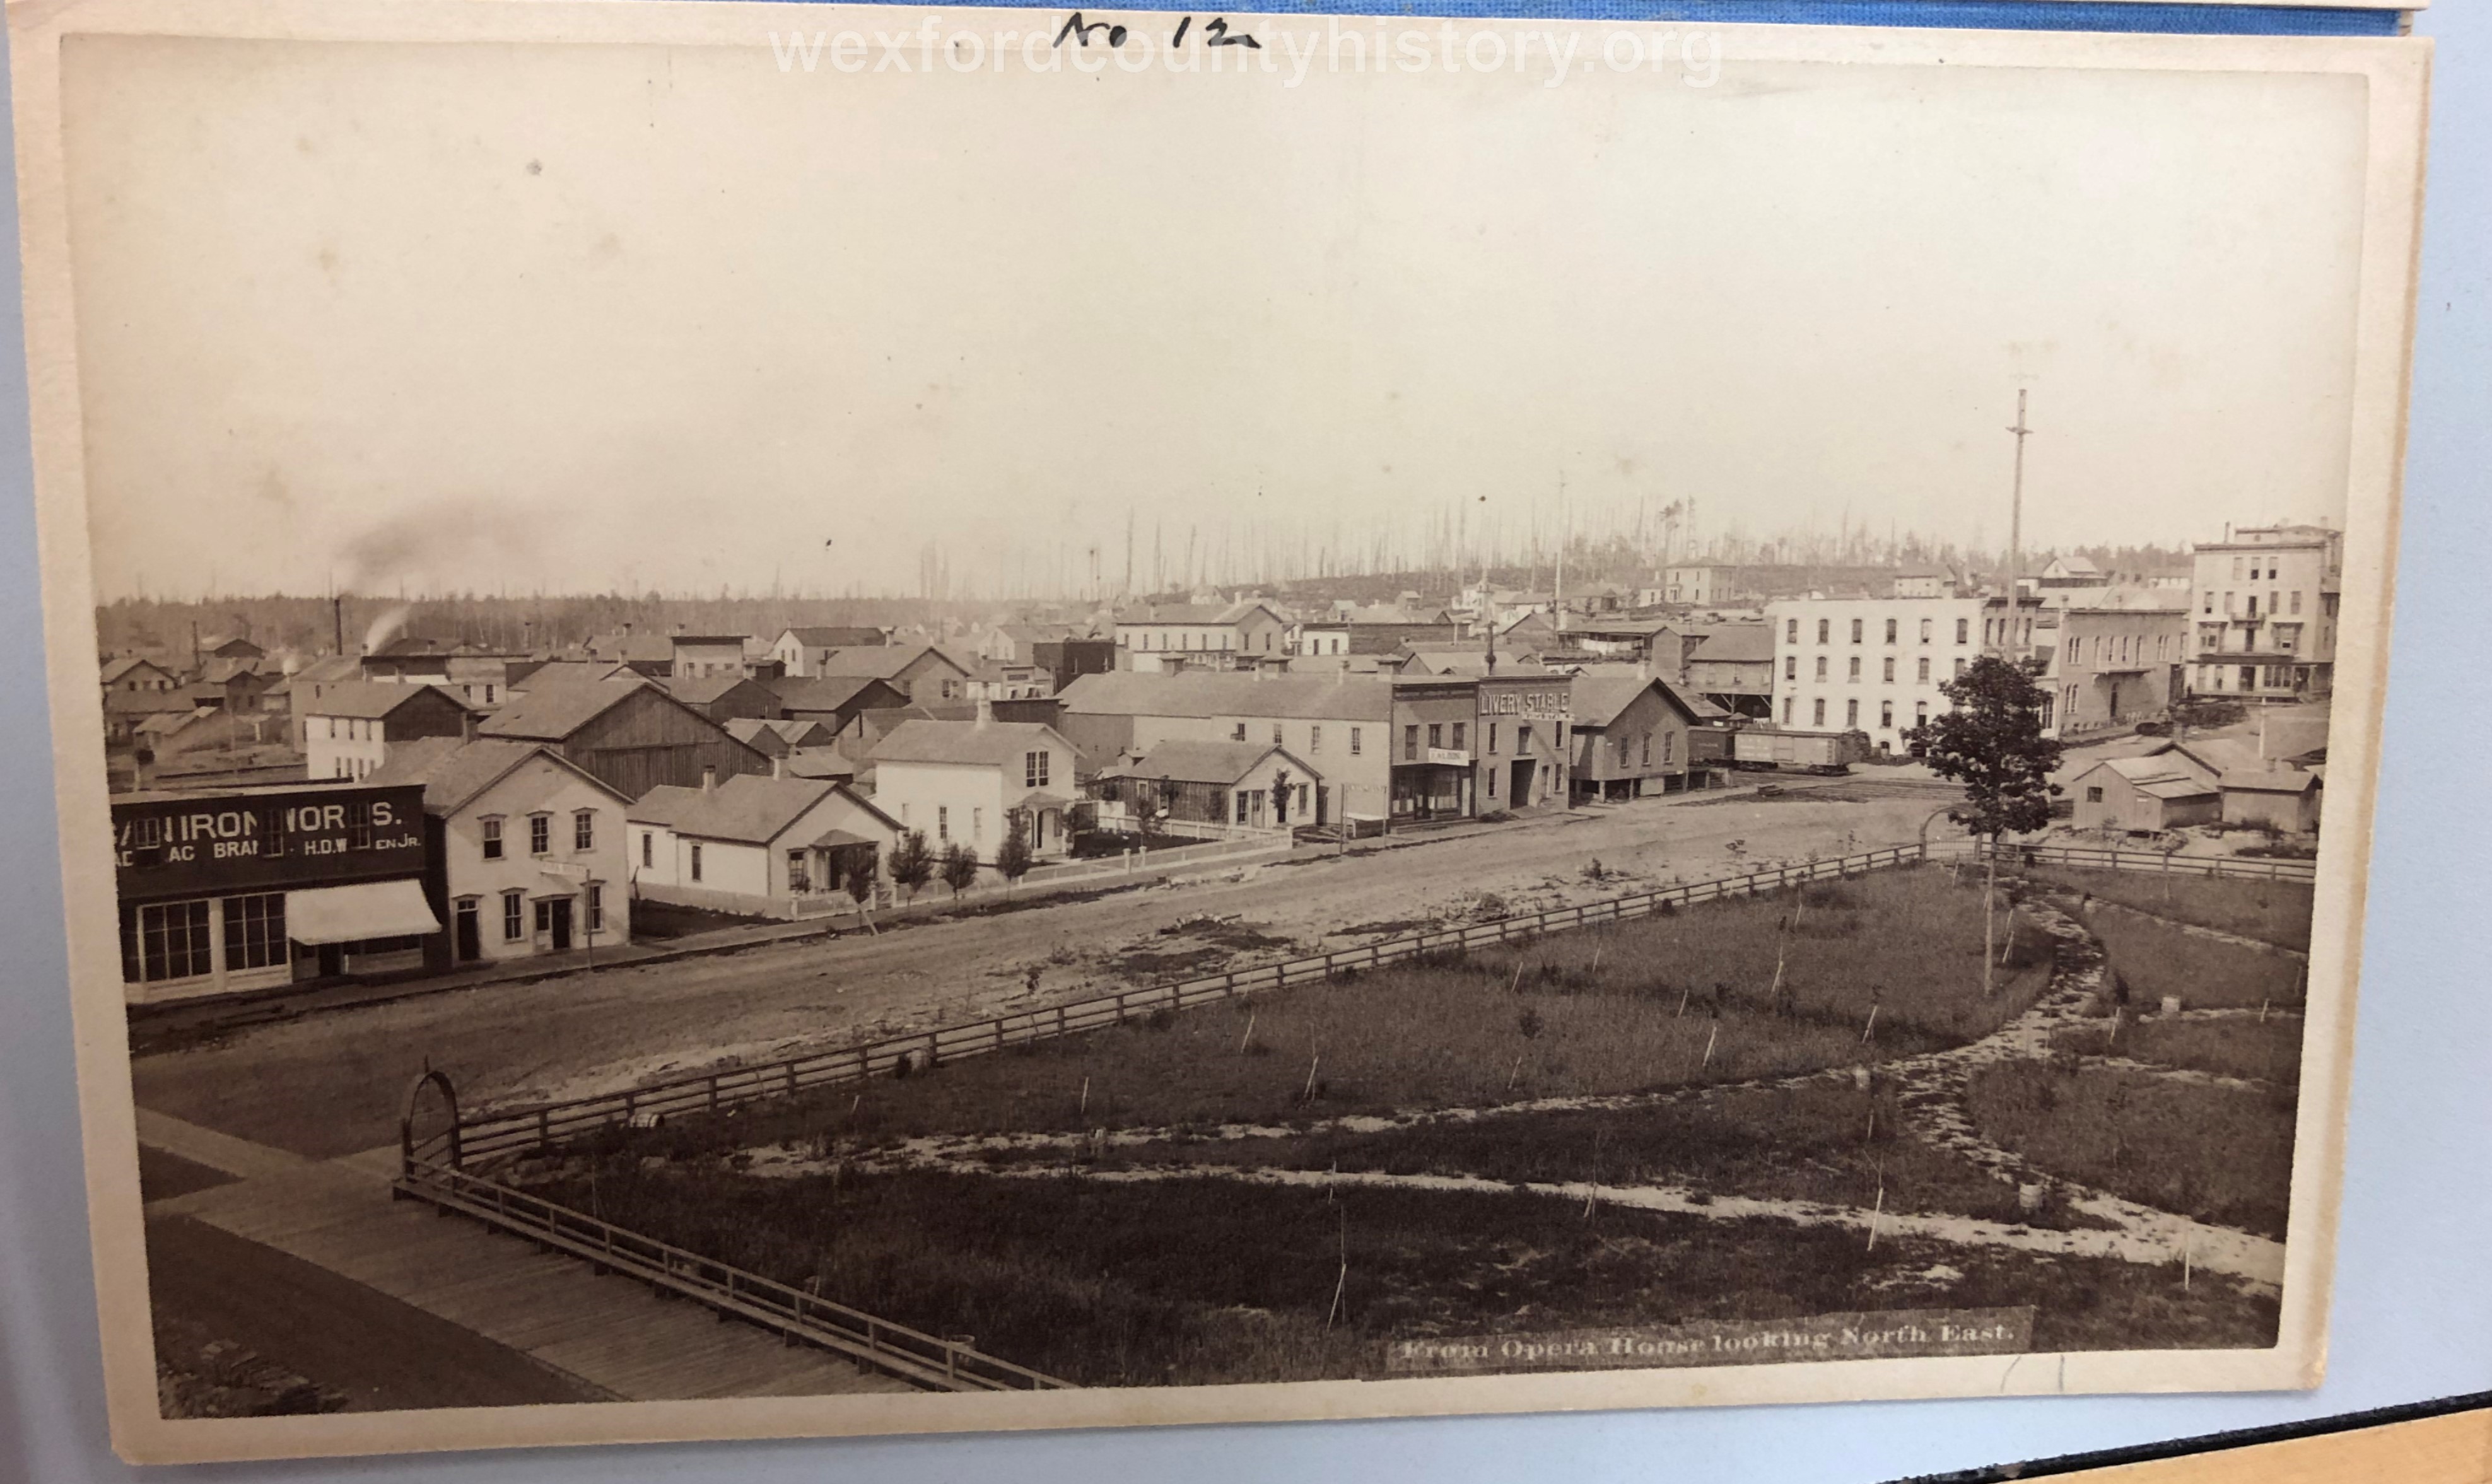 View From Forrester Opera House Looking Northeast, c. 1882